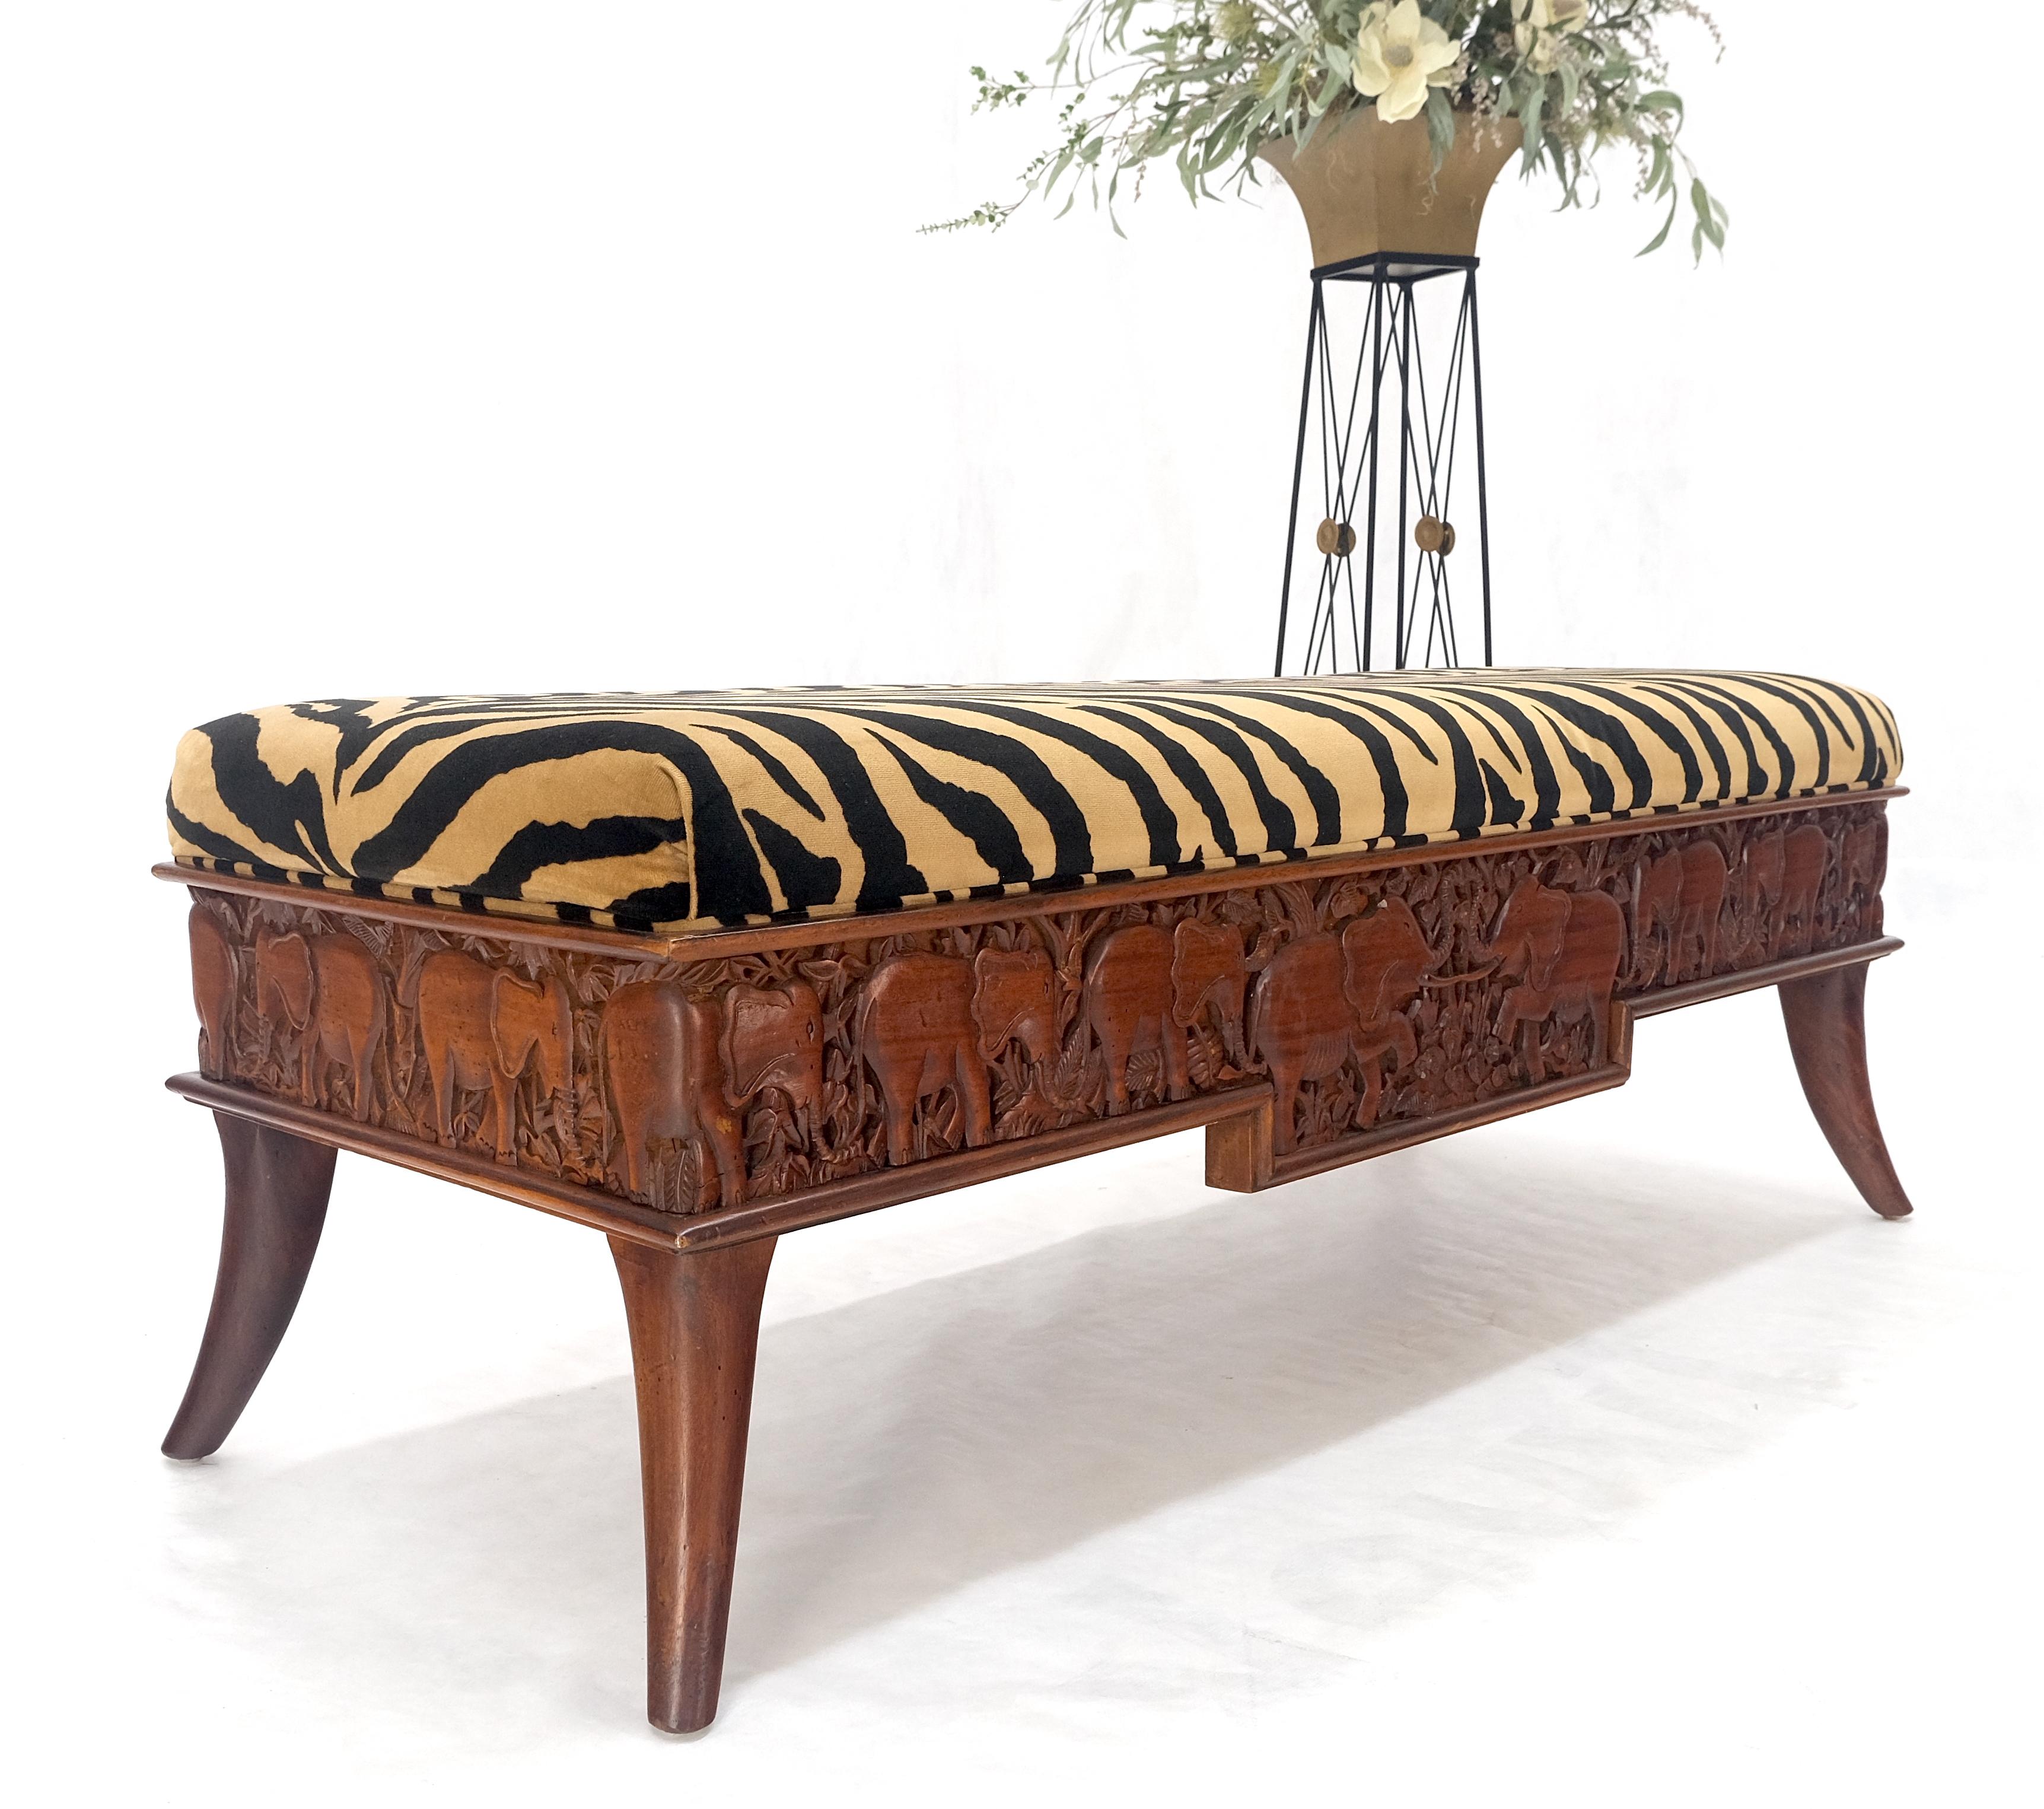 20th Century Heavy Solid Carved Elephants Teak Base Tiger Upholstery Horn Leg Bench MINT! For Sale